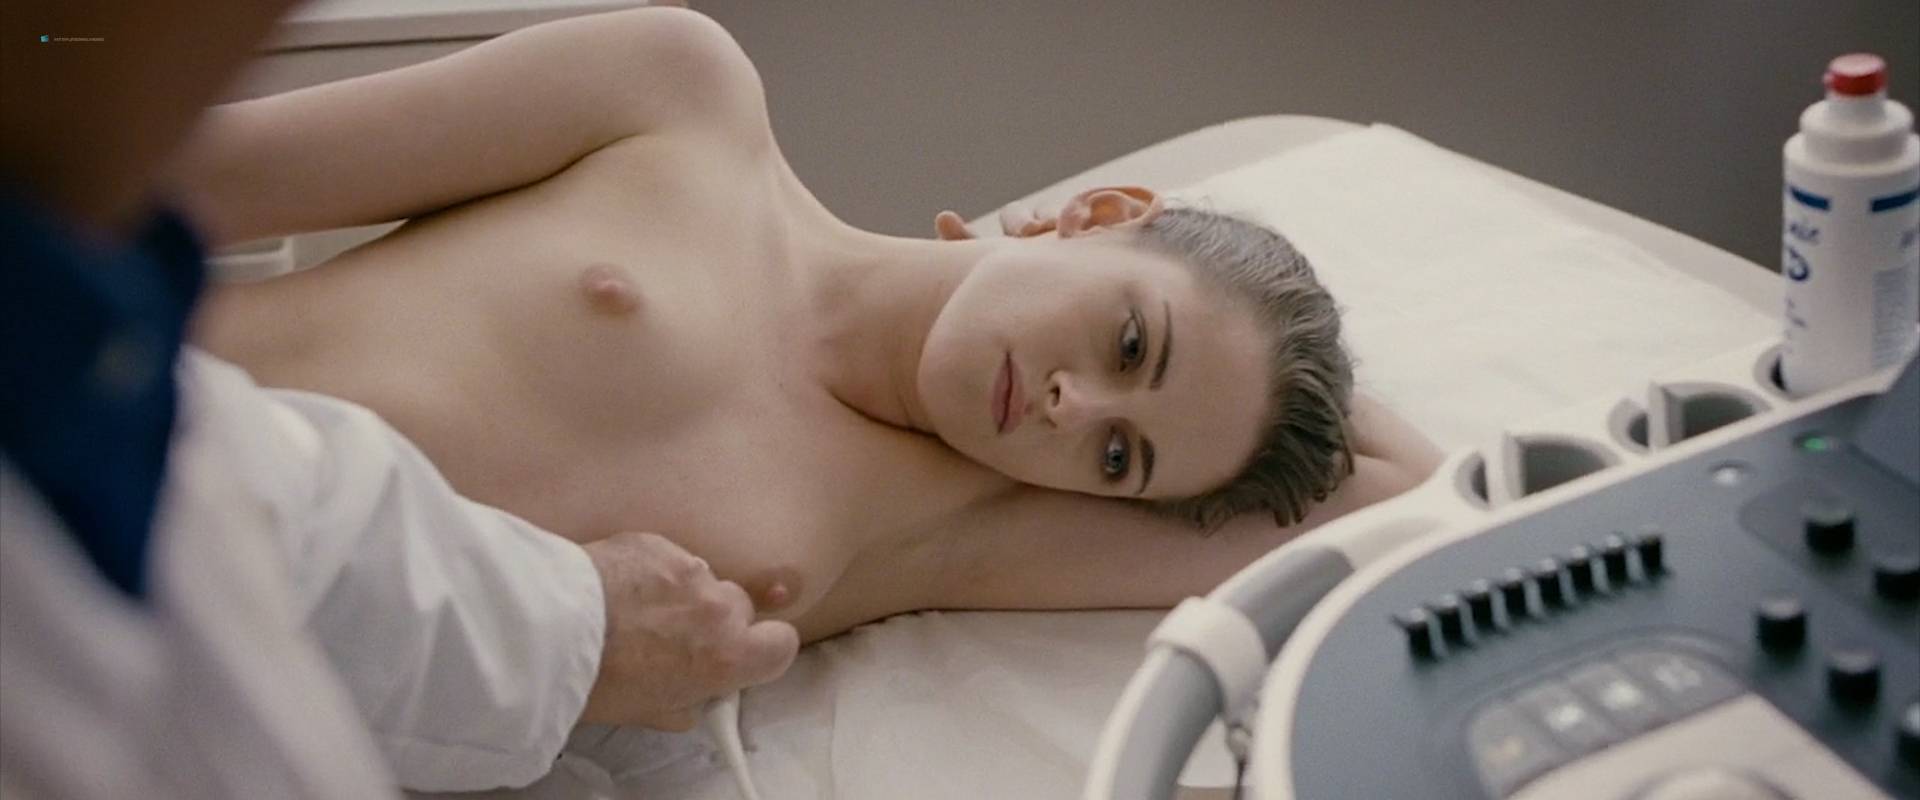 Kristen-Stewart-nude-topless-and-hot-while-masturbating-Personal-Shopper-20...